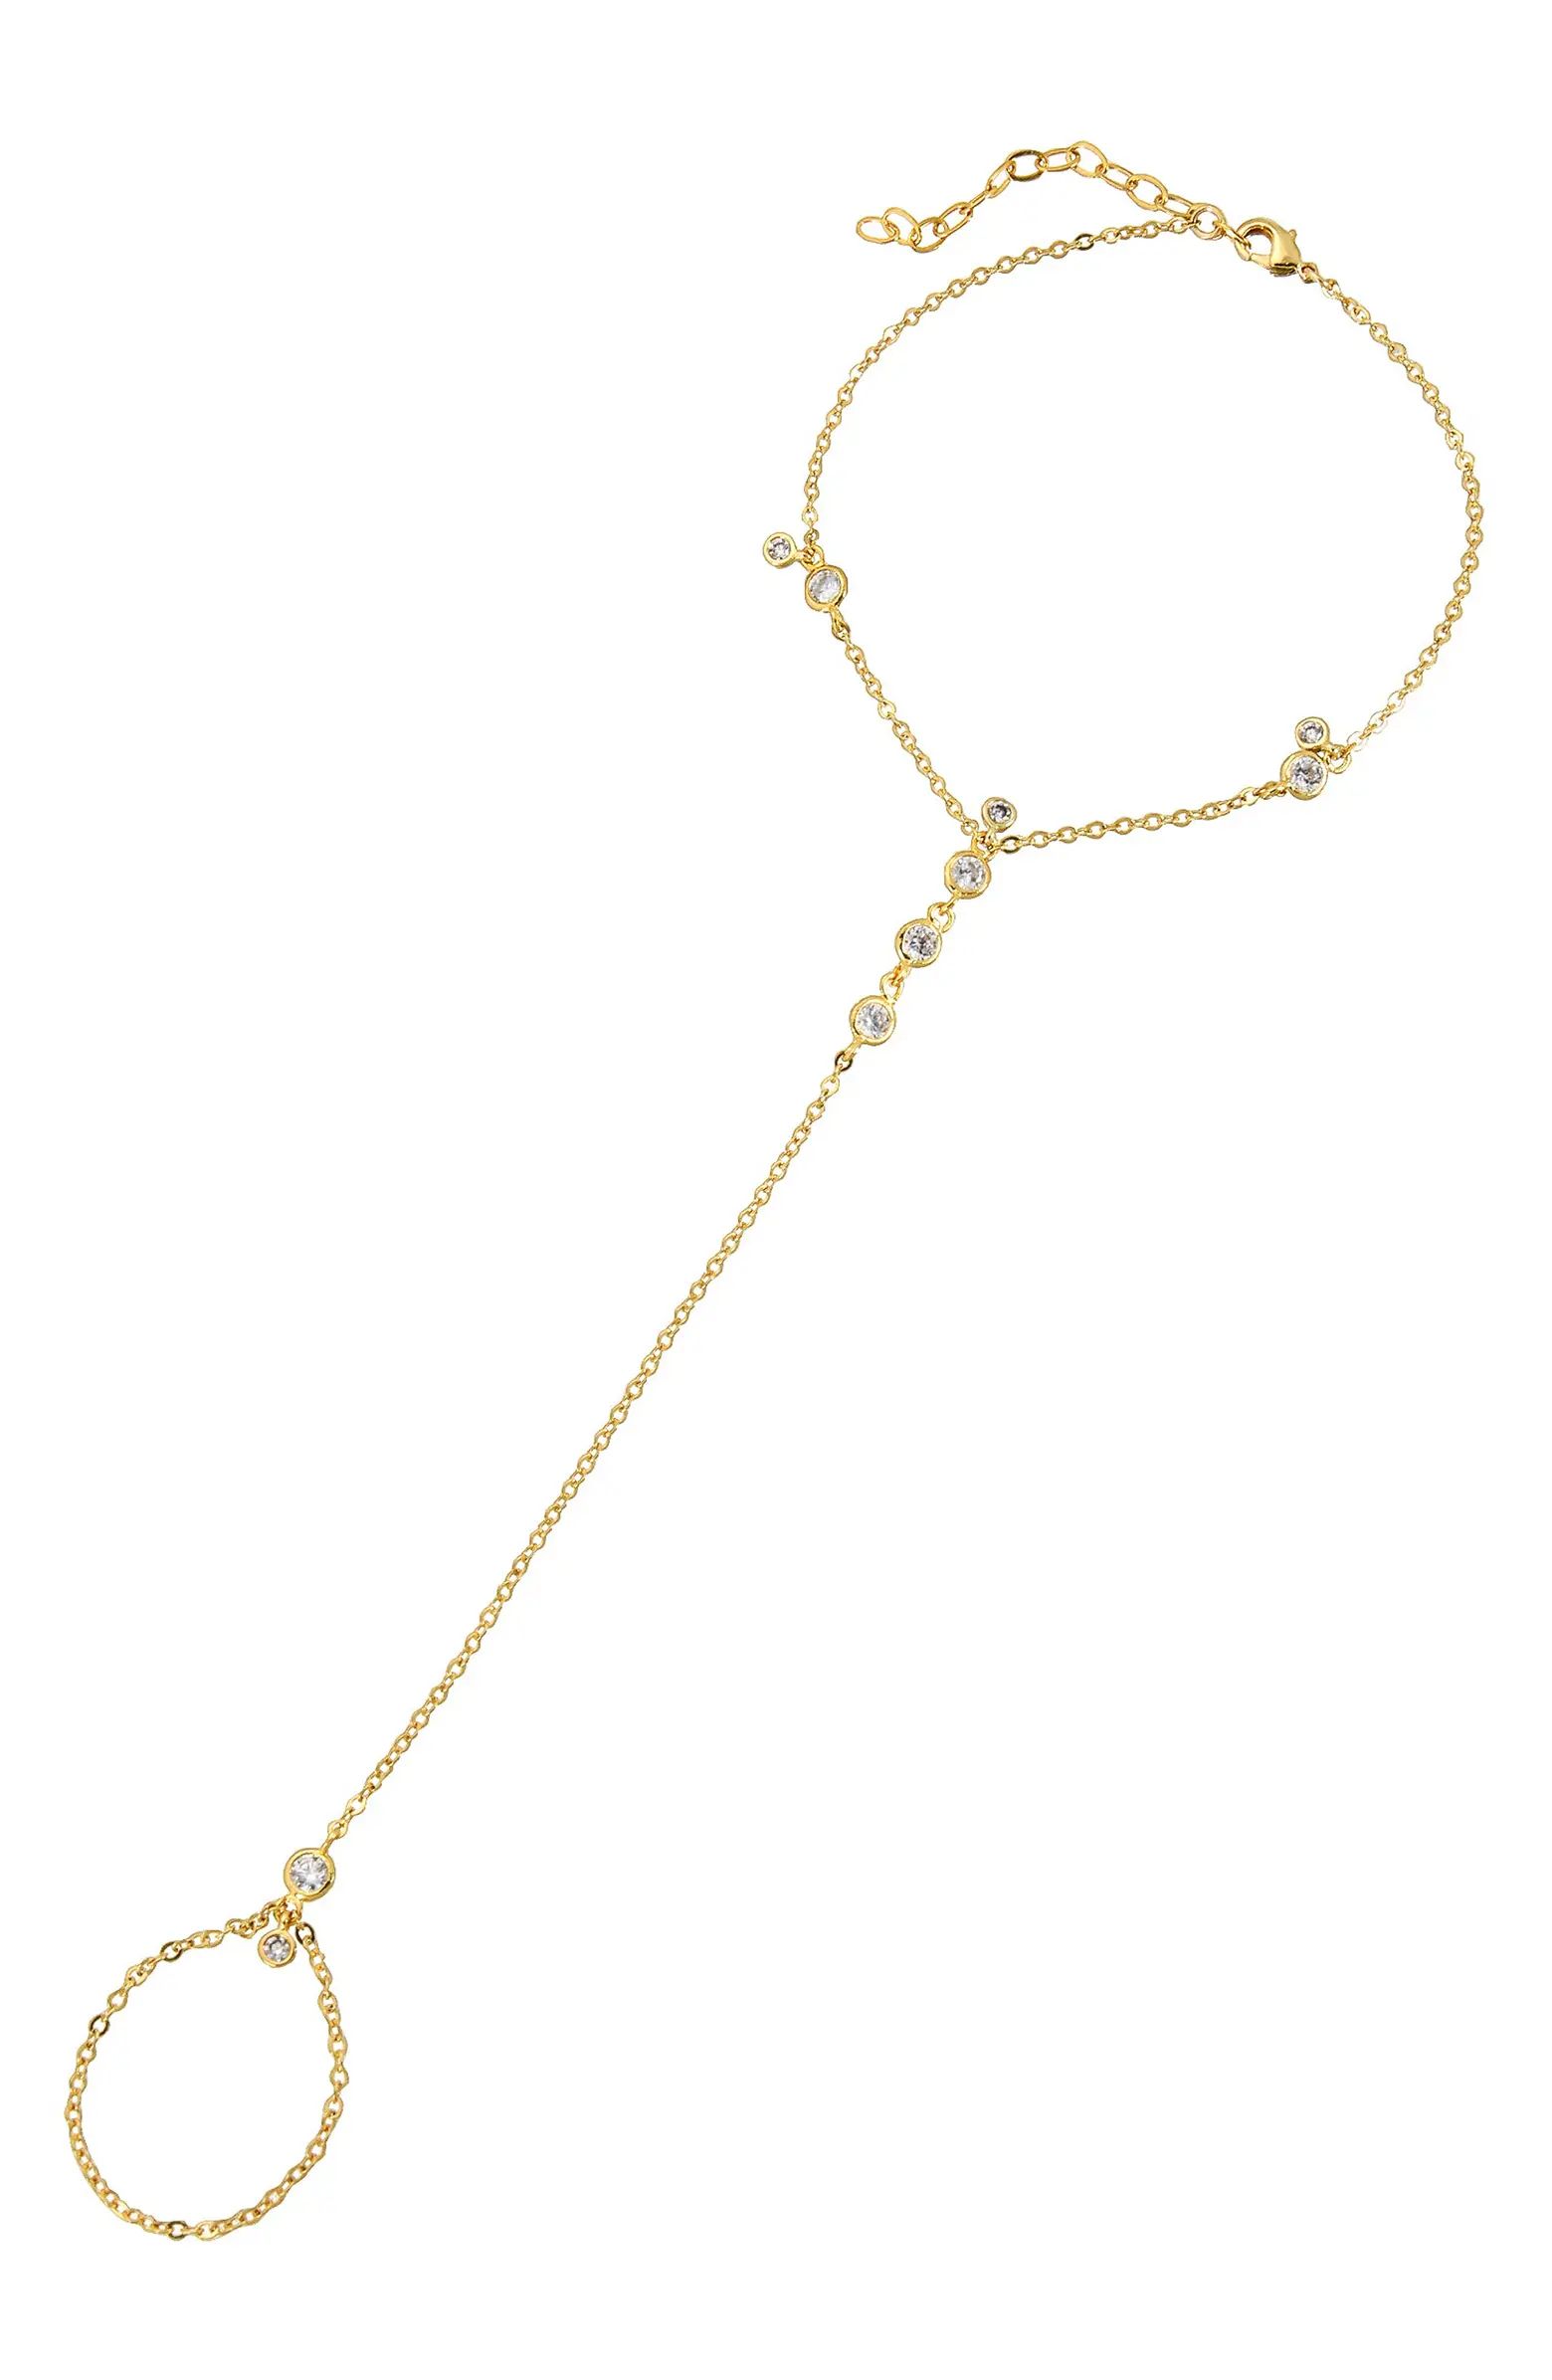 Details & CareSpread shine from your wrist to fingertips with this delicate hand chain embellishe... | Nordstrom